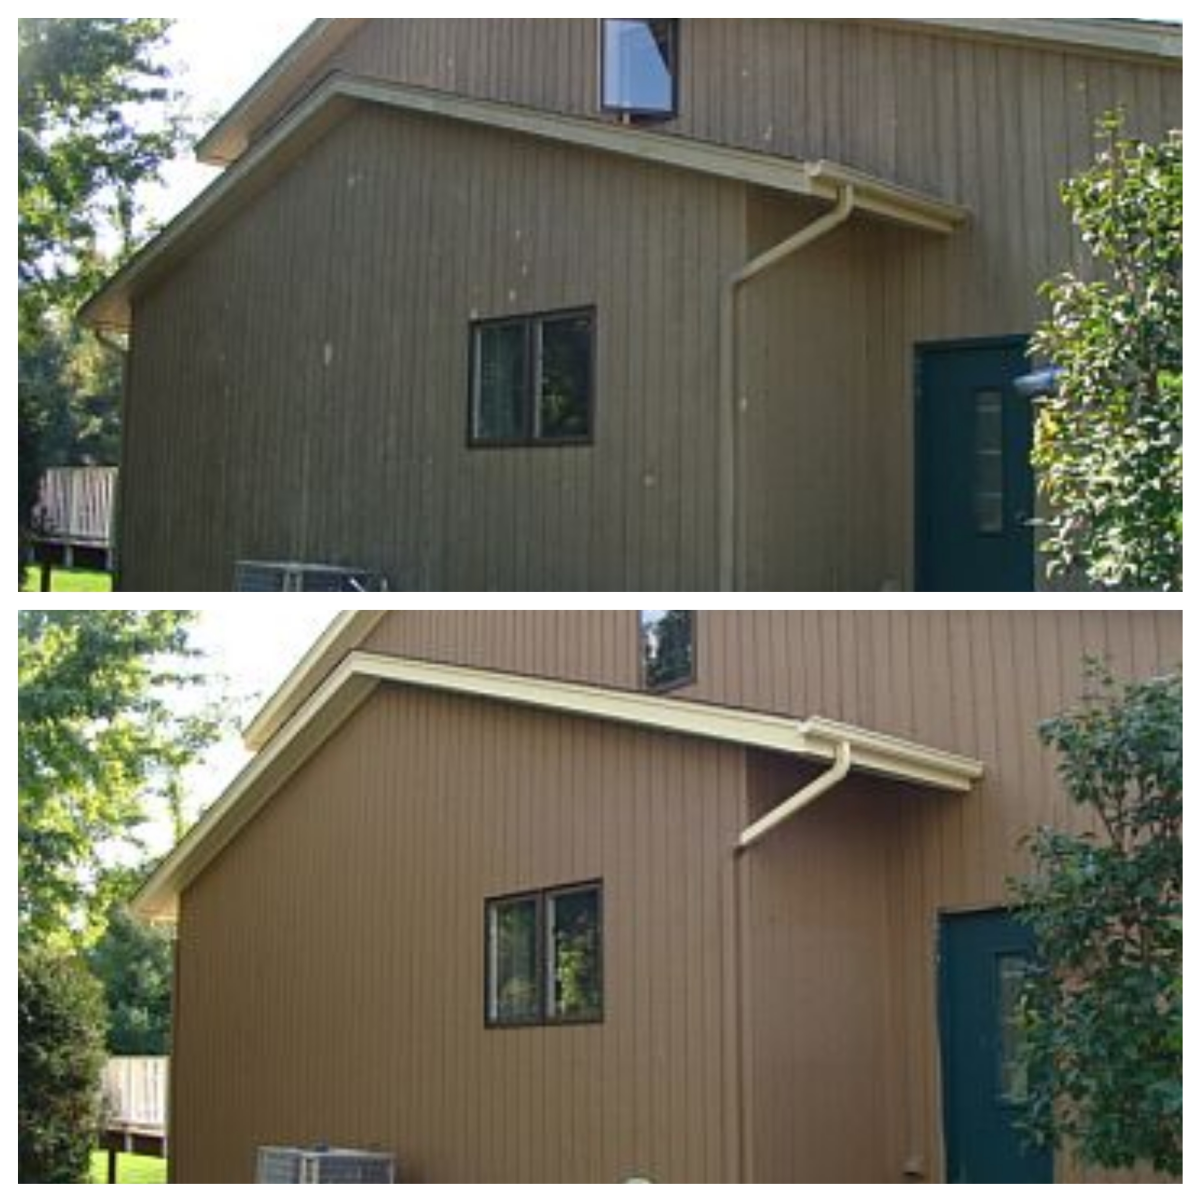 Wood siding and trim I prepped and painted. 